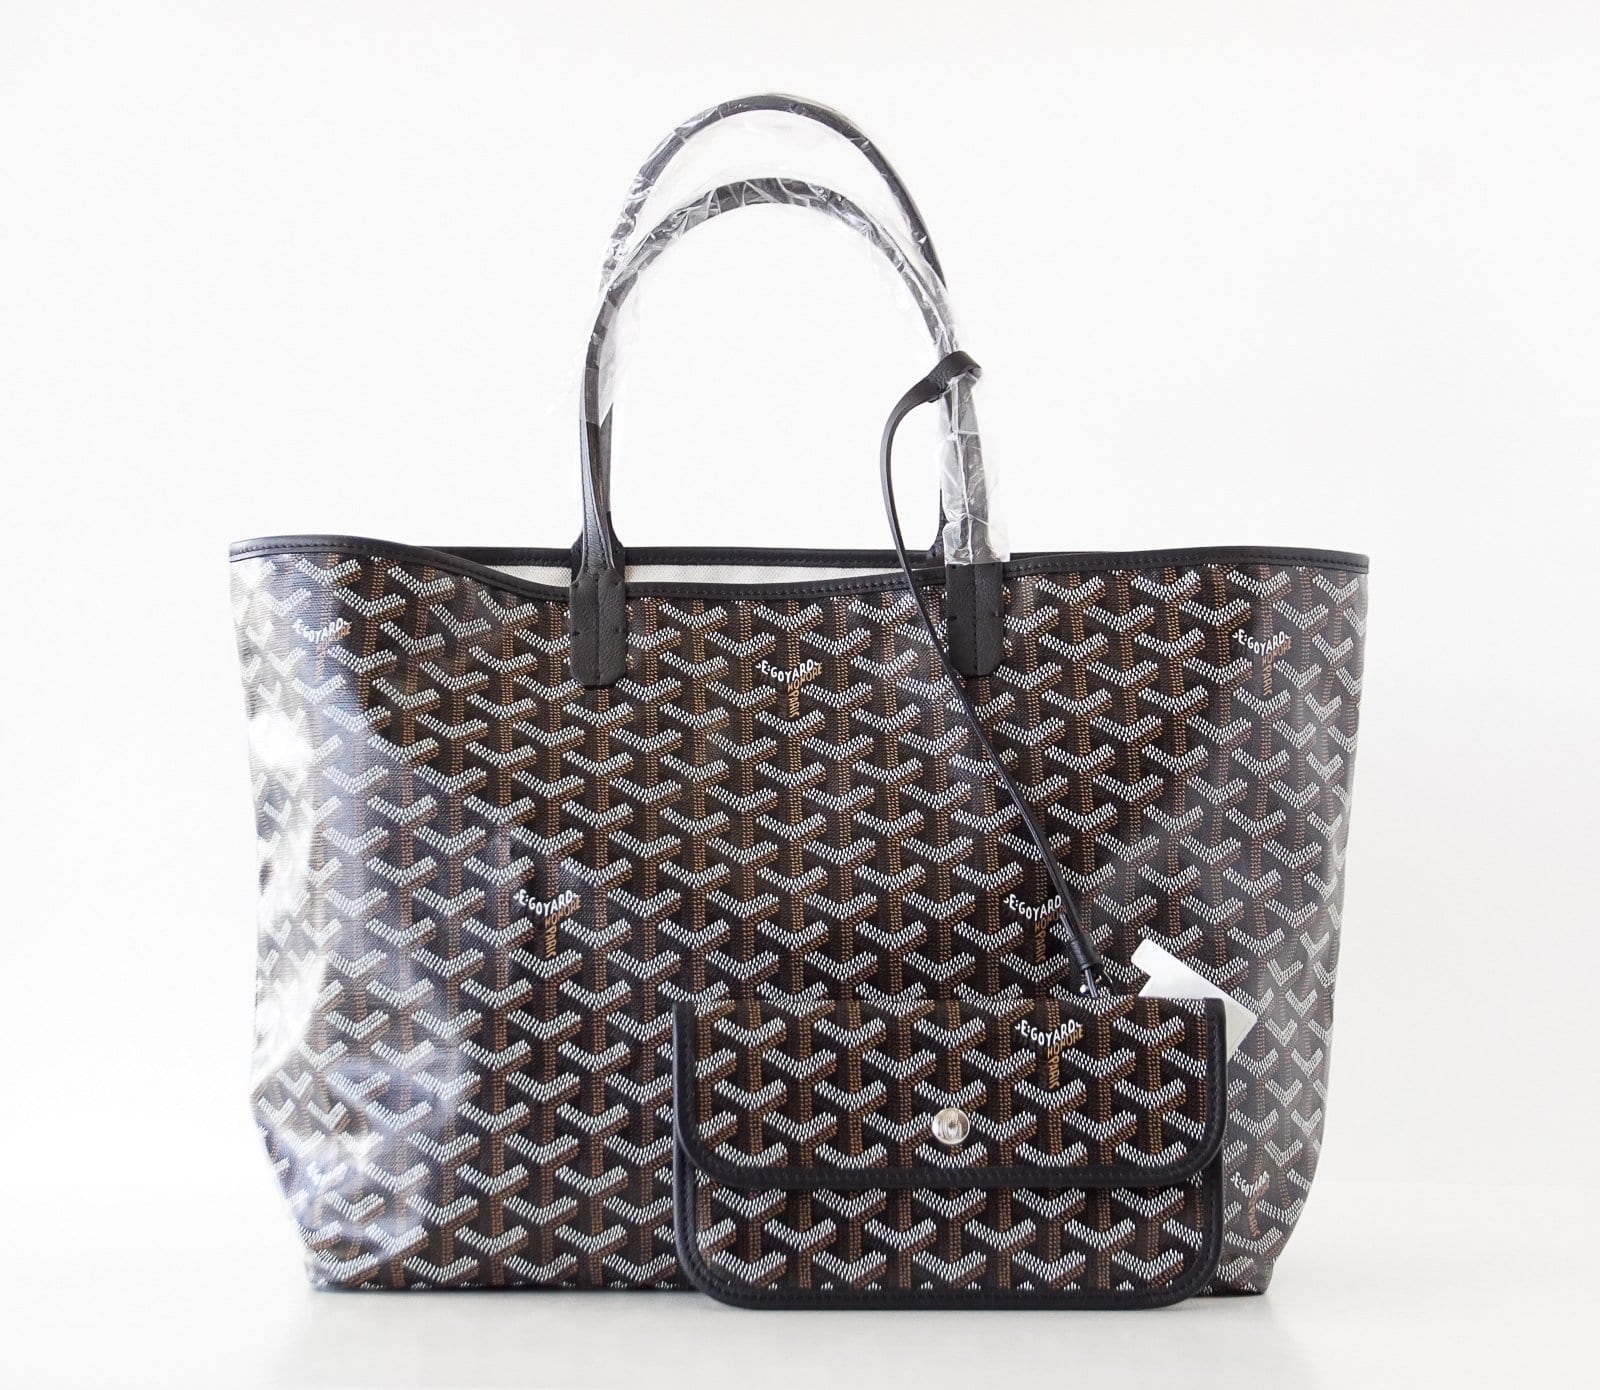 Goyard Black Chevron St Louis PM Tote Bag with Pouch 1223gy50 For